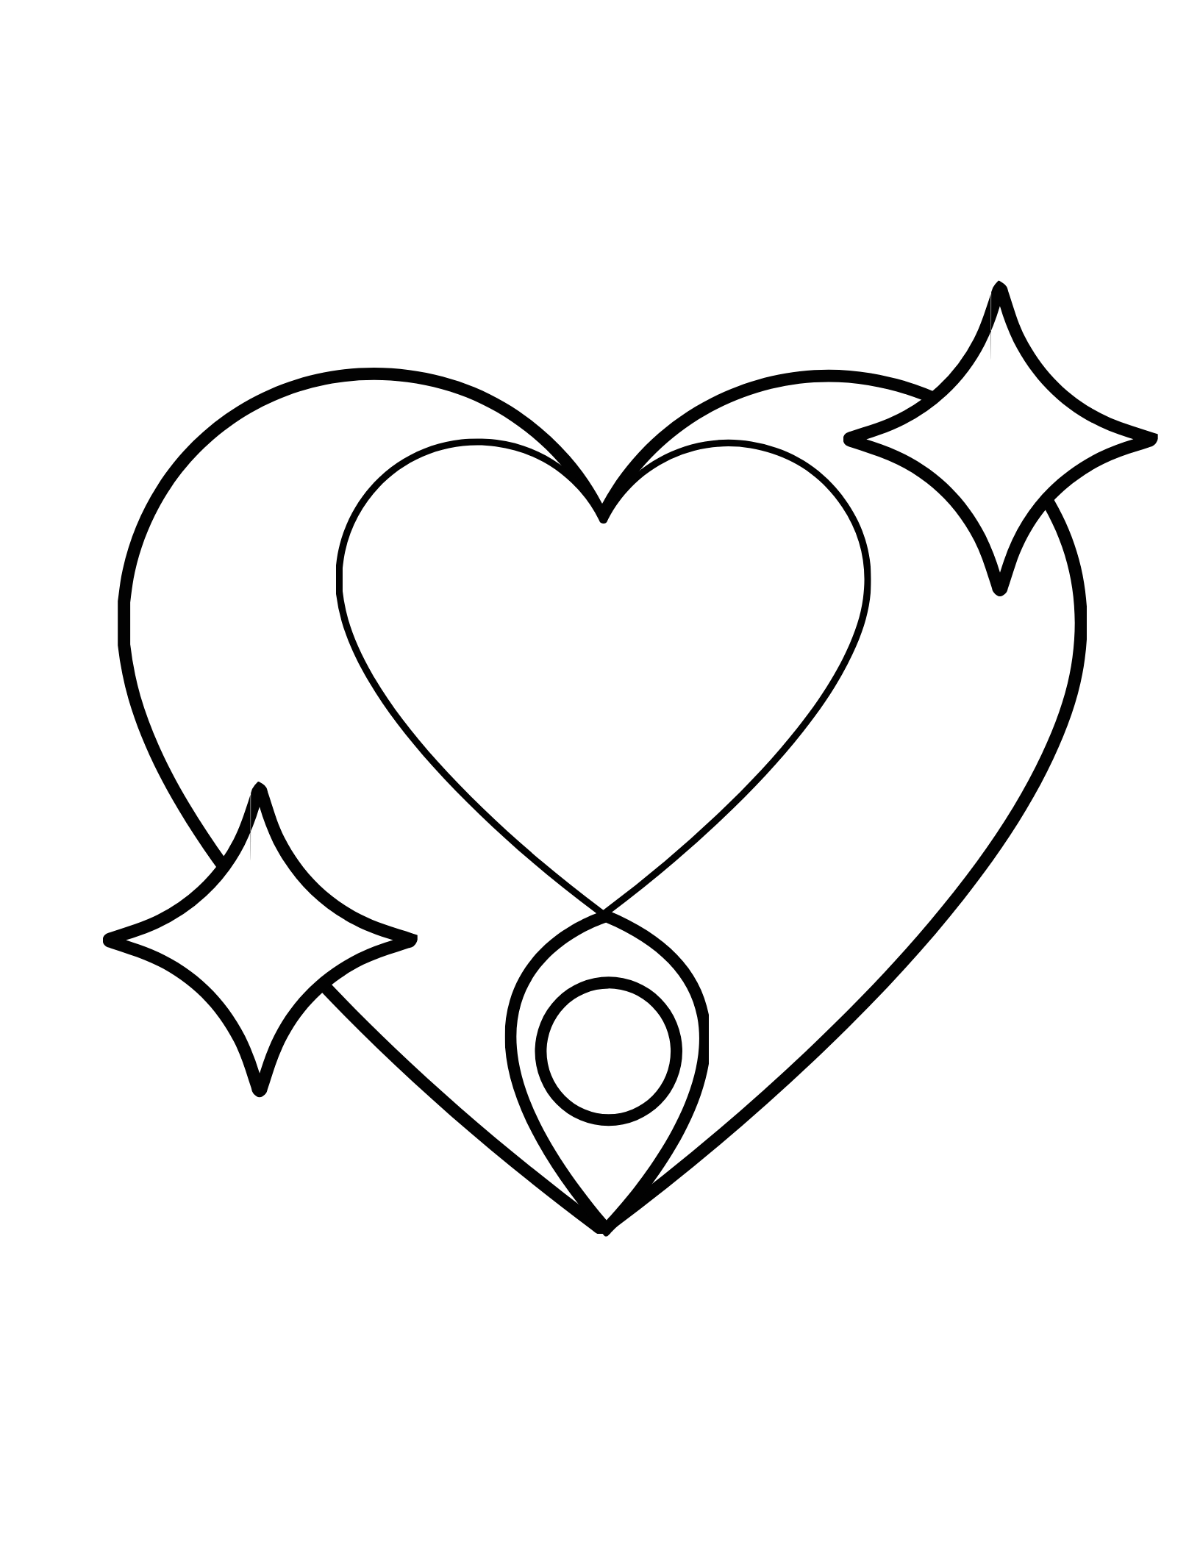 Decorative Heart Coloring Page Template